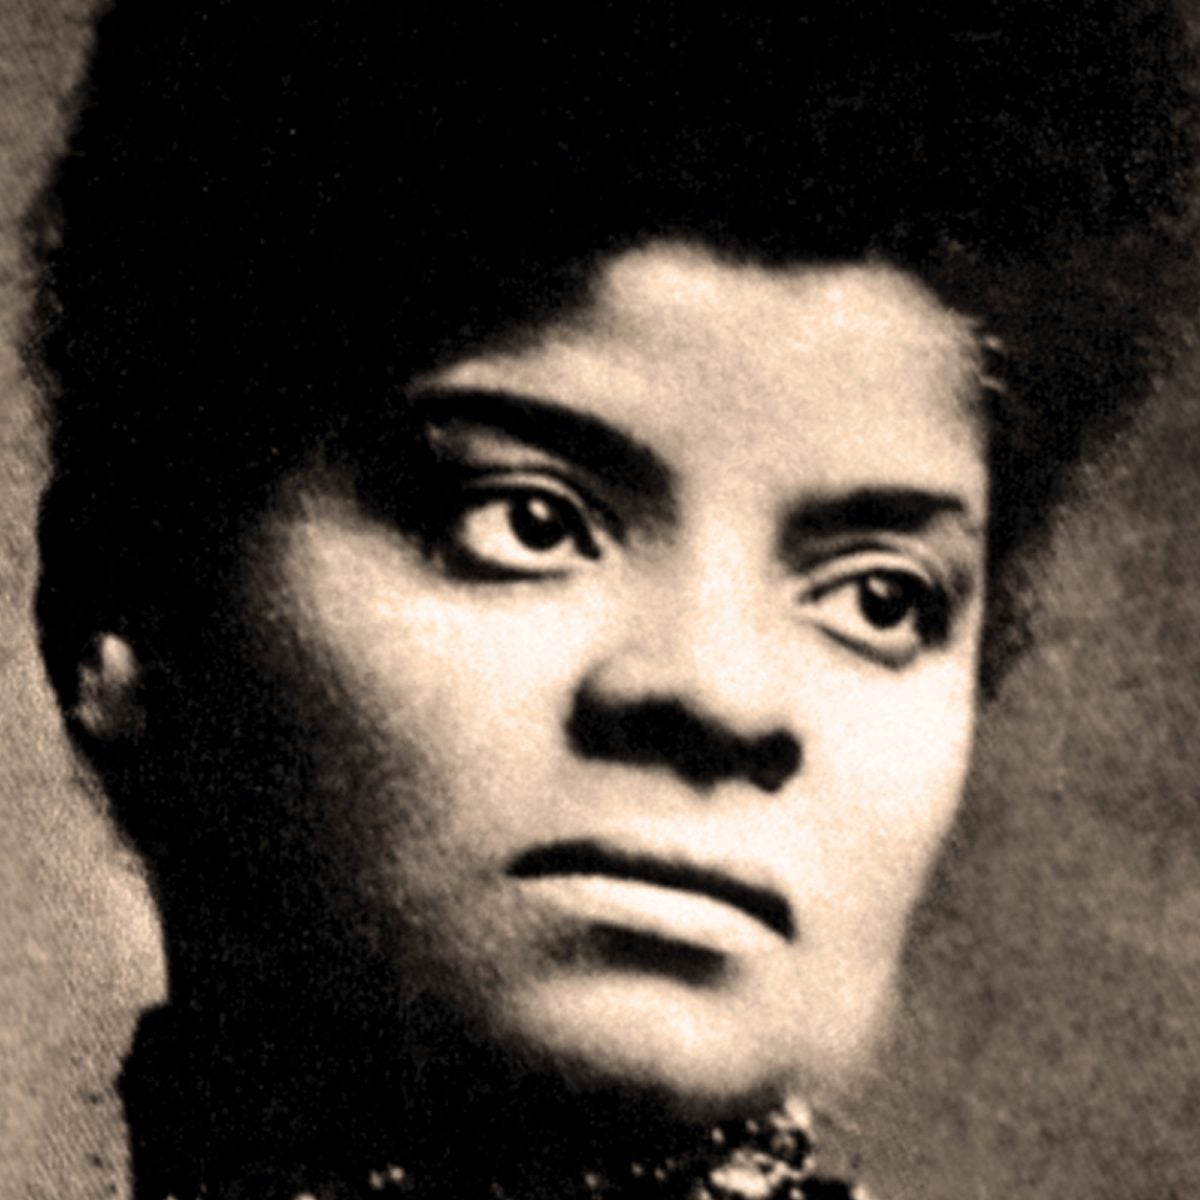 Barbie Honors Anti-Lynching Activist and Suffragist Ida B. Wells With New Doll